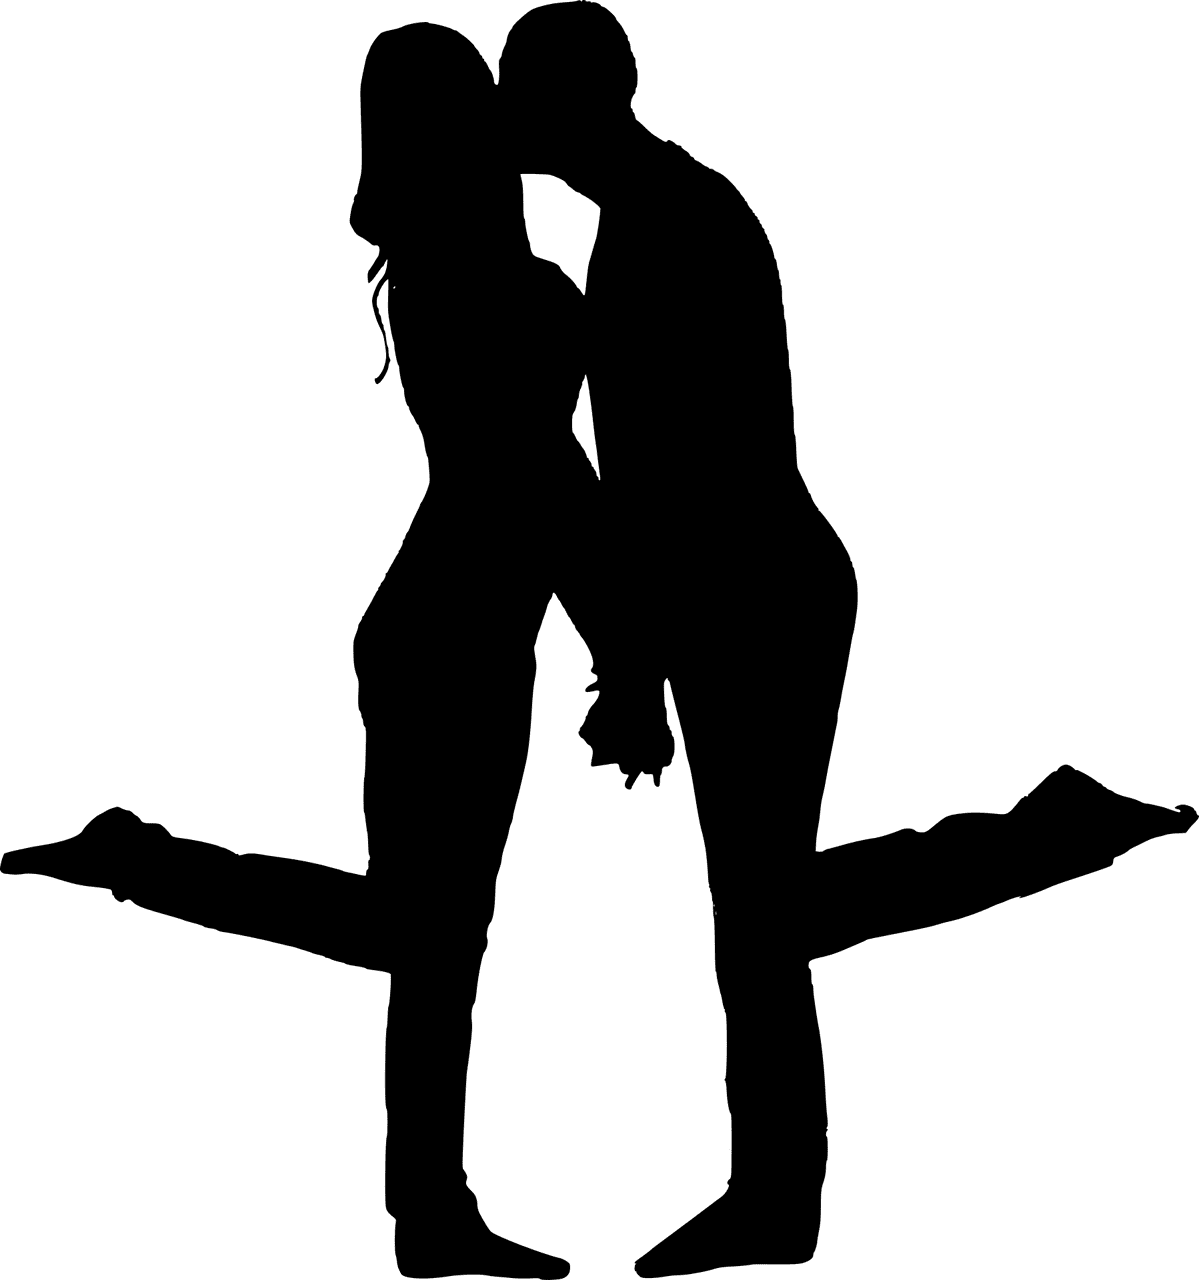 A silhouette of a happy couple | Source: Pixabay